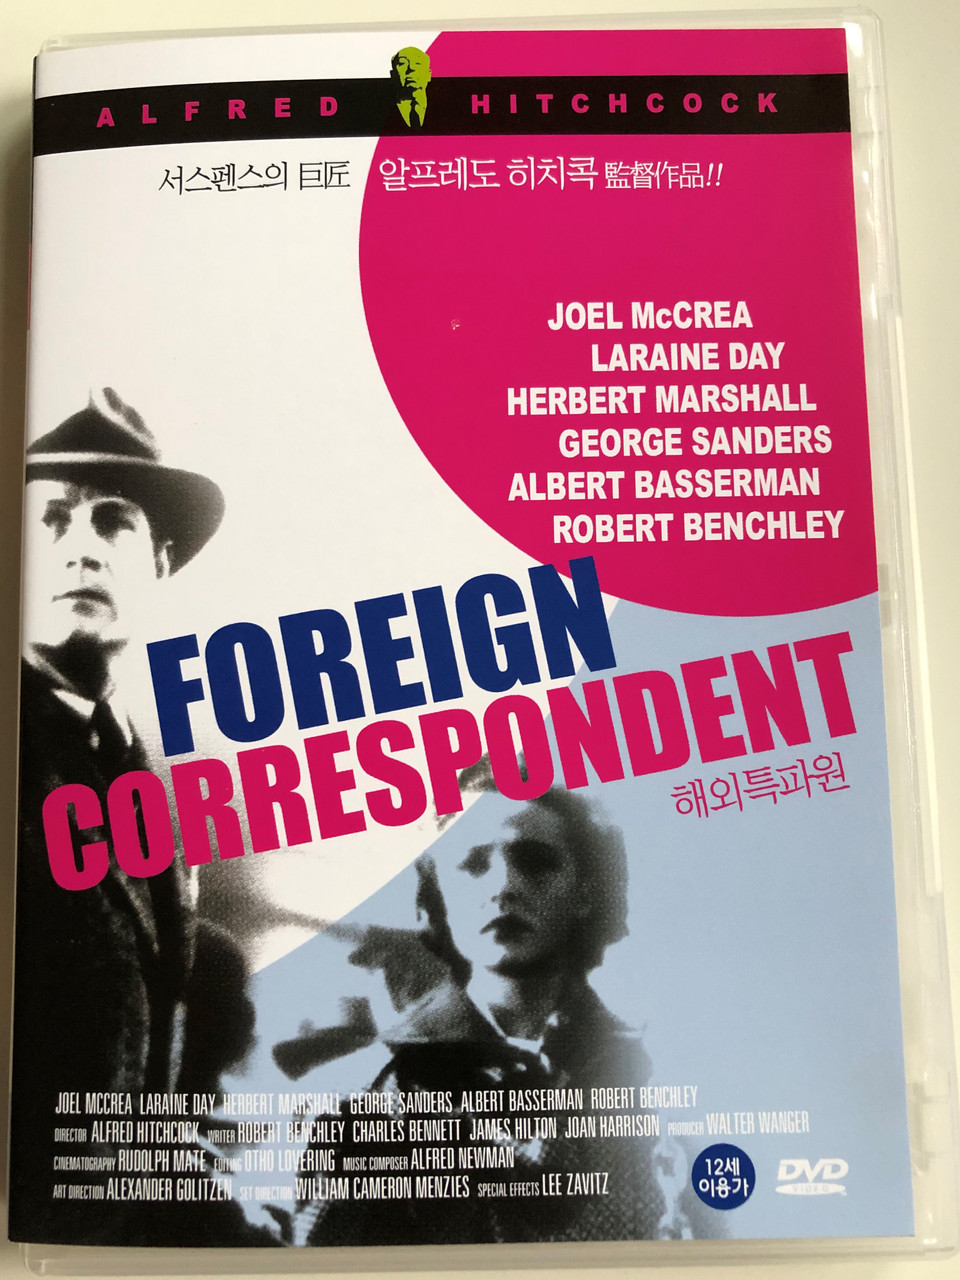 Foreign Correspondent DVD 1940 / Directed by Alfred Hitchcock / Starring:  Joel McCrea, Laraine Day, Herbert Marshall - Bible in My Language